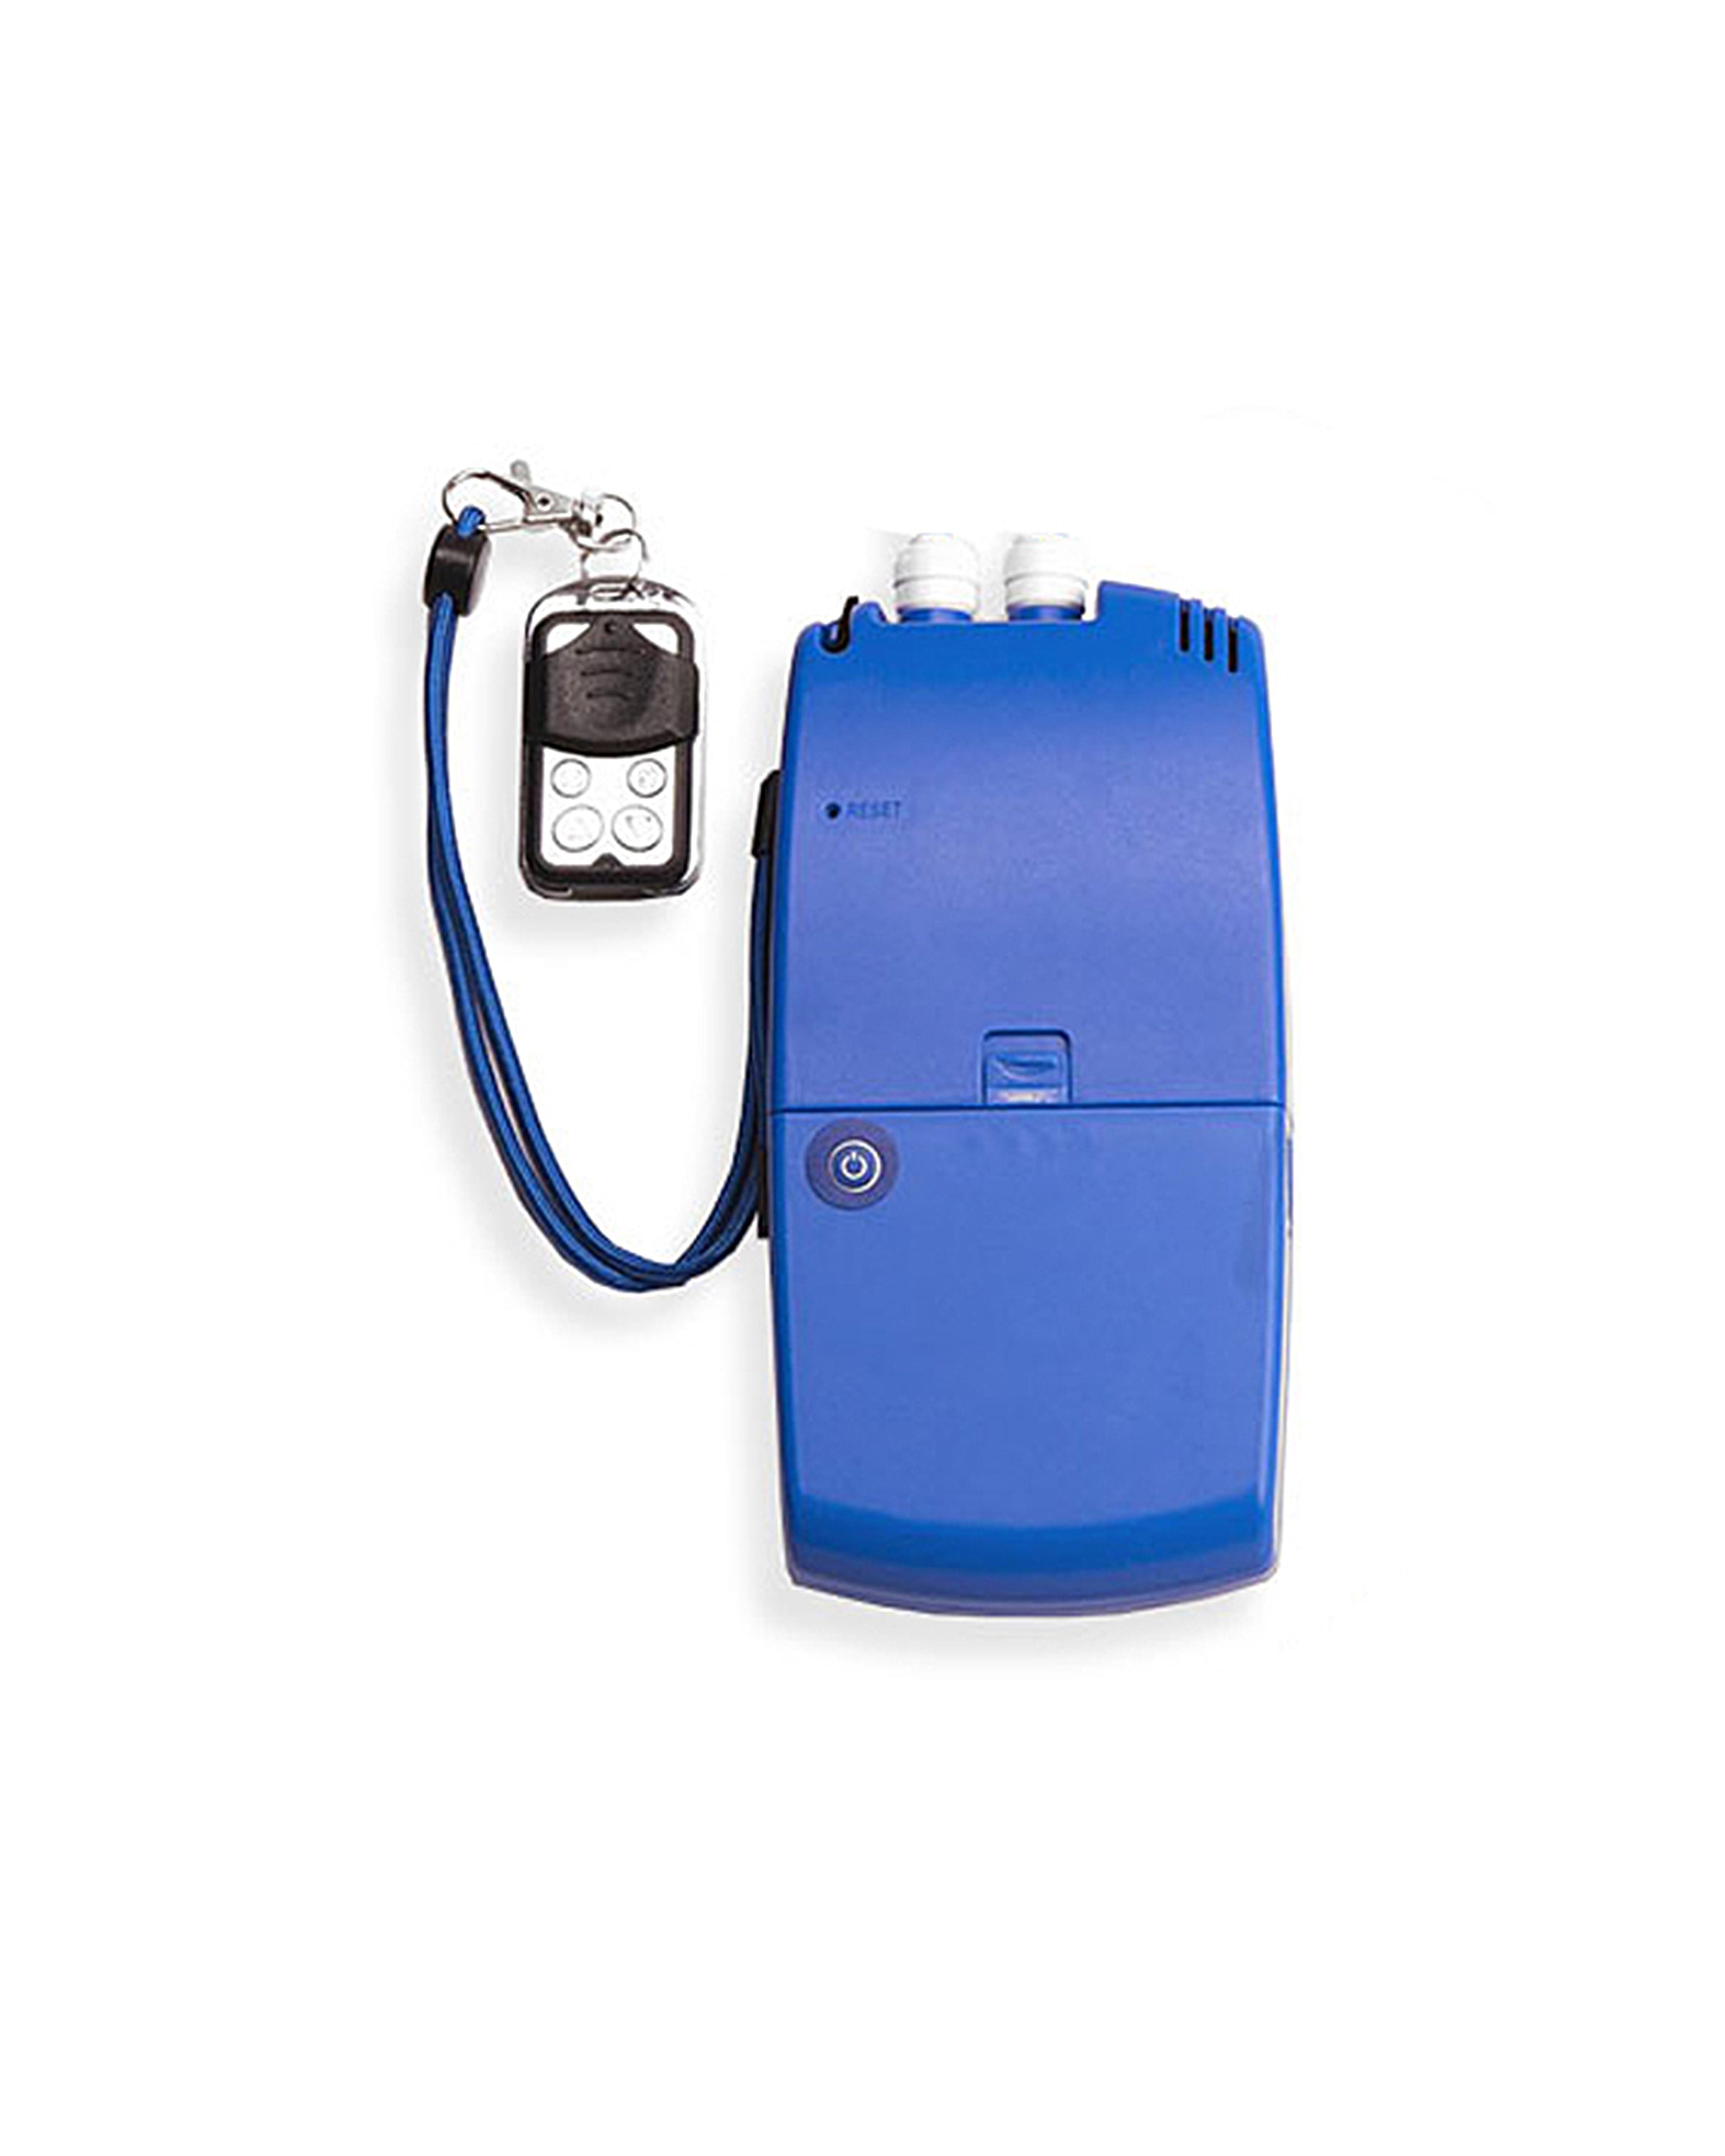 wireless remote and blue misting pump